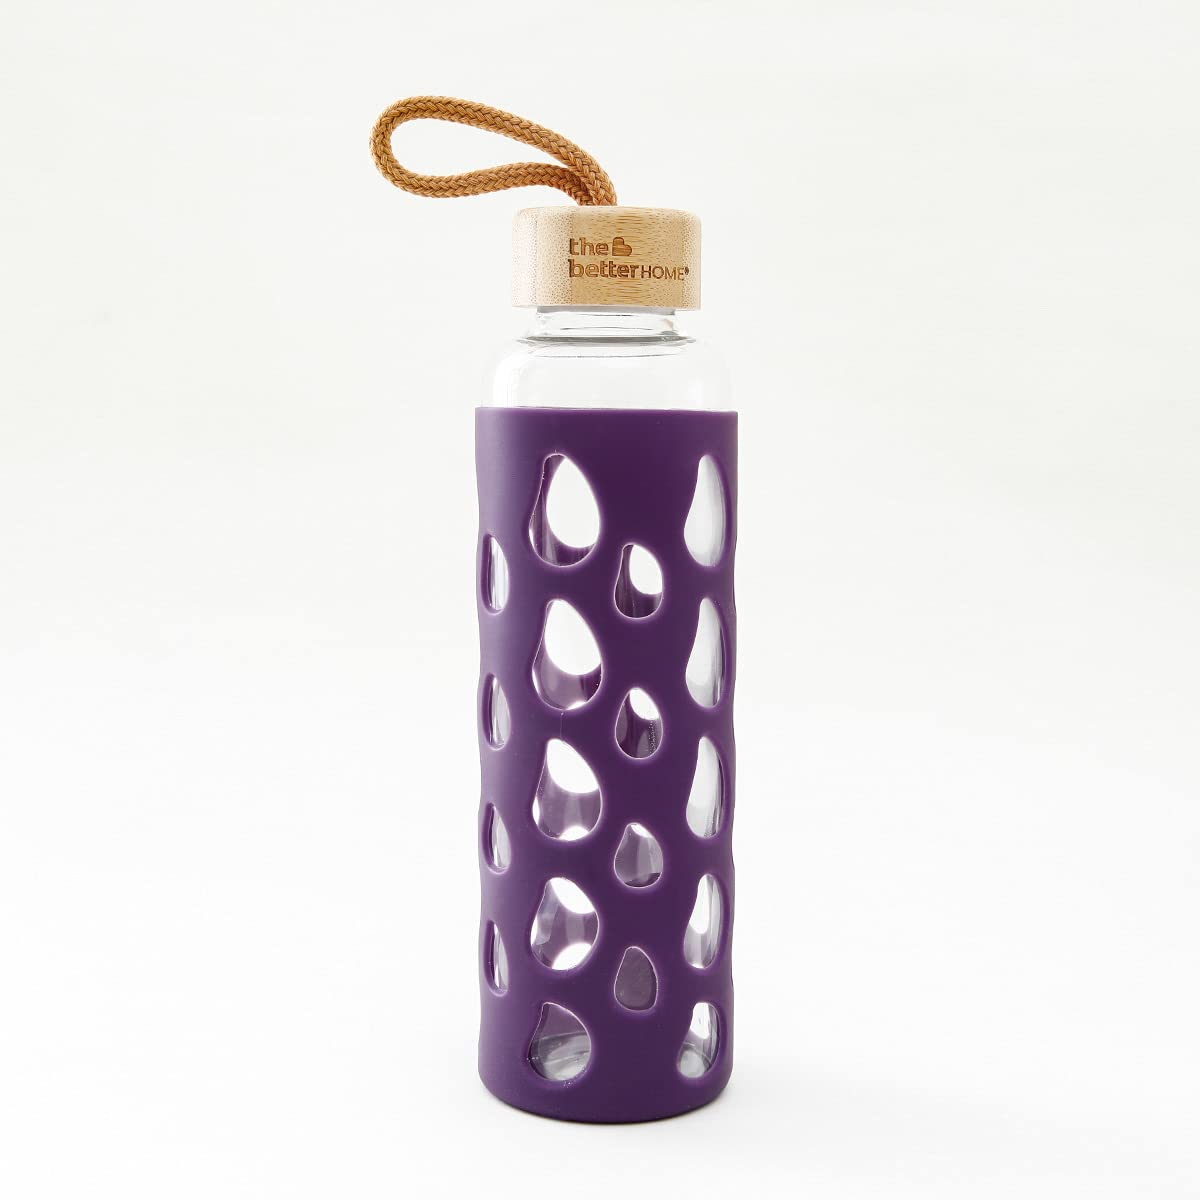 The Better Home 550 Ml Borosilicate Glass Water Bottle With Silicon Sleeve&Bamboo Lid Glass Water Bottle With Cover Water Bottle For Office For Kids Easy To Carry Loop Pack Kof 1,Purple